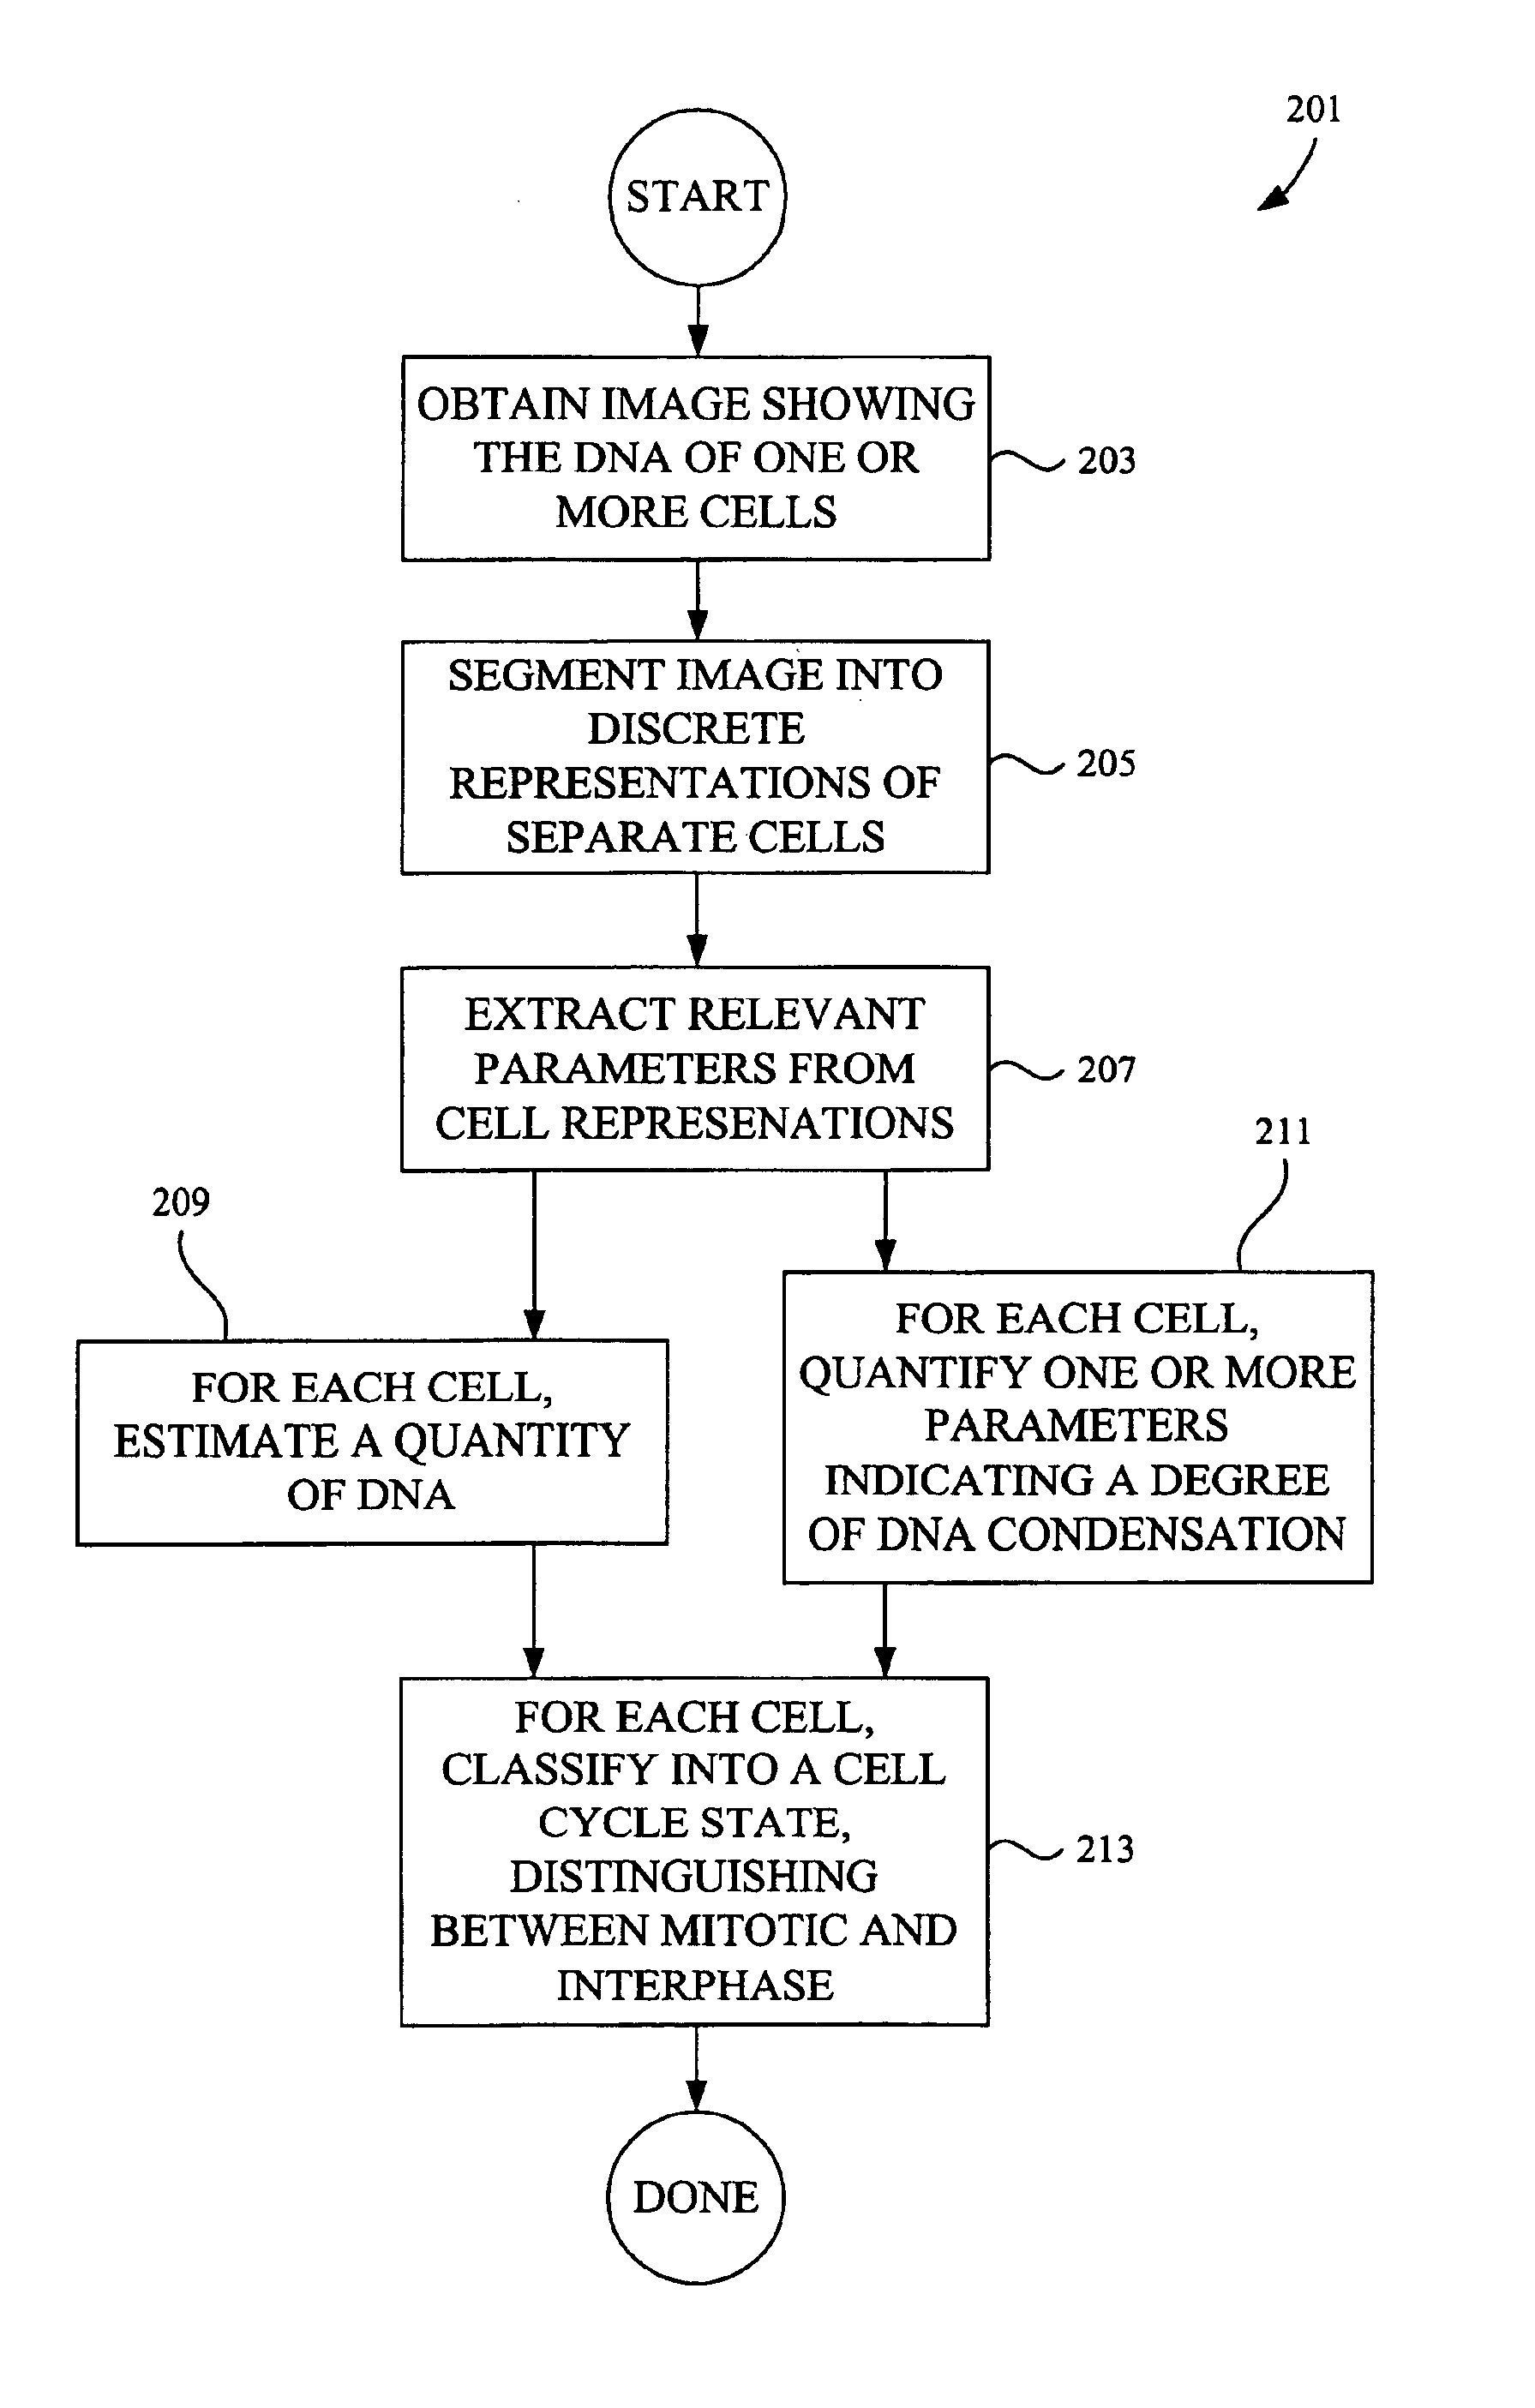 Classifying cells based on information contained in cell images